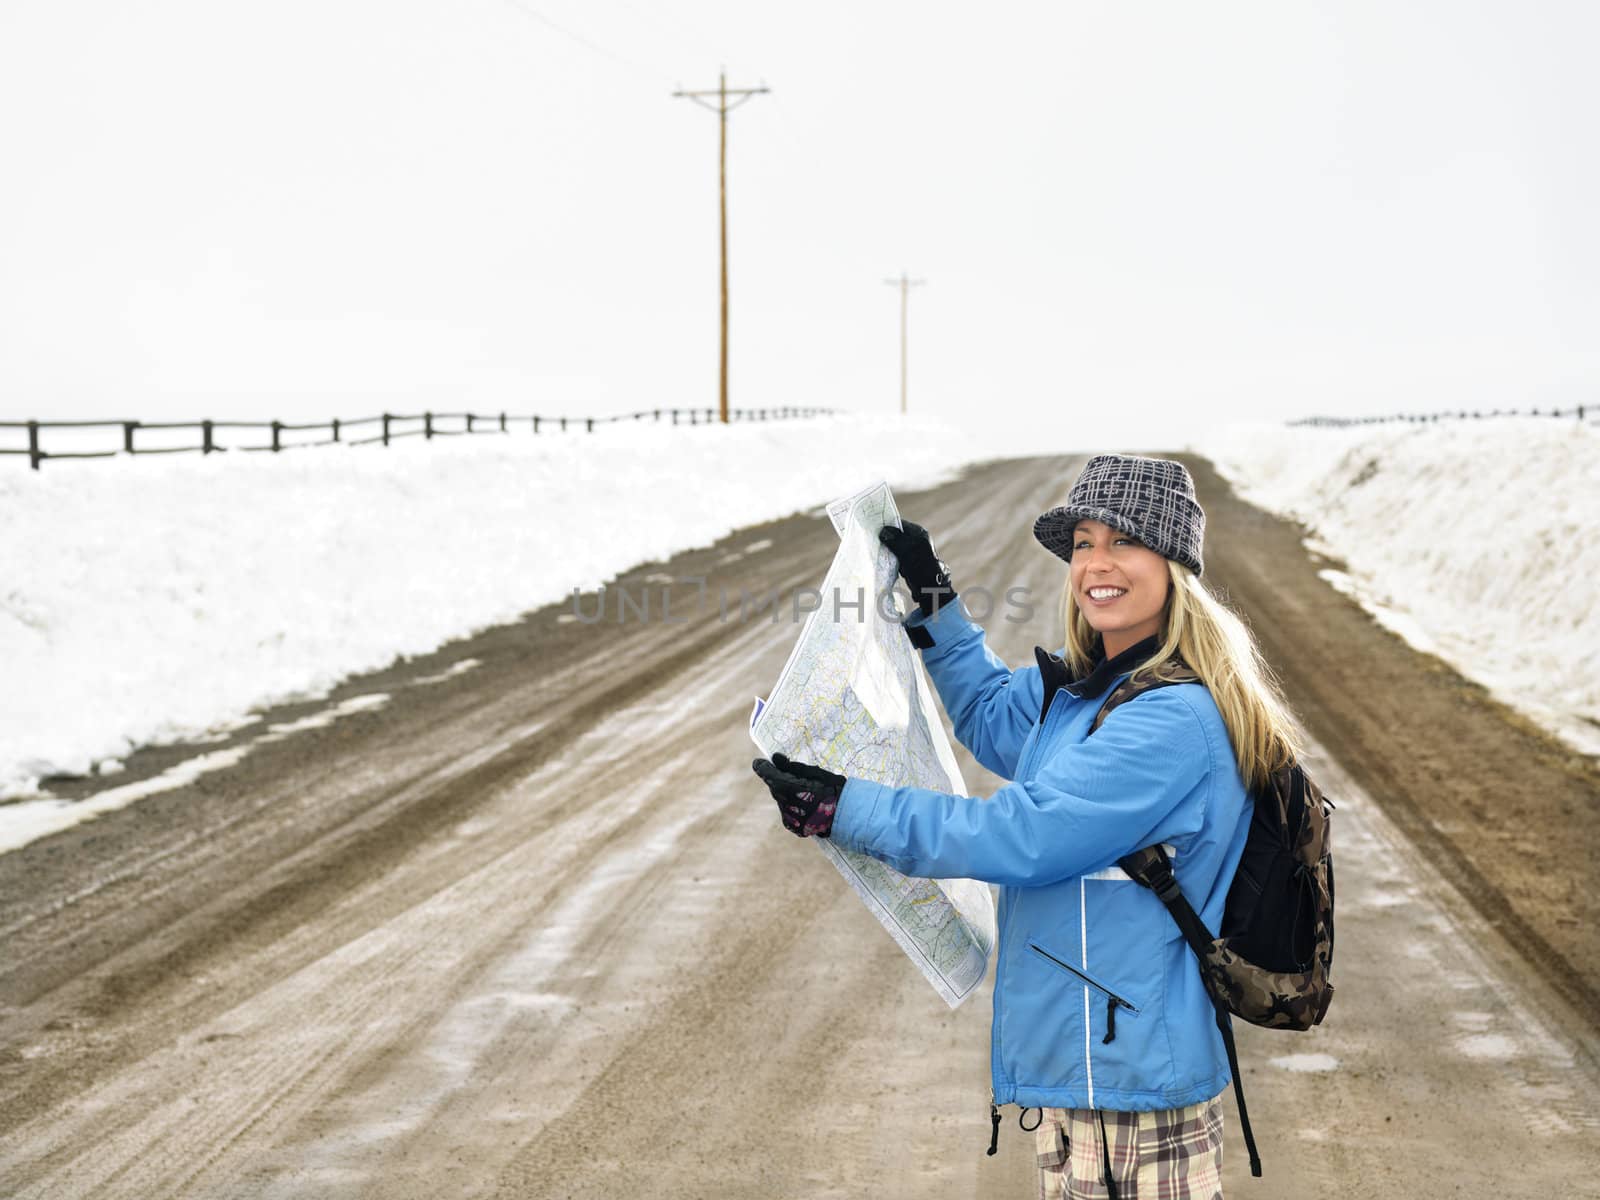 Young woman in winter clothes standing on muddy dirt road holding open map smiling.